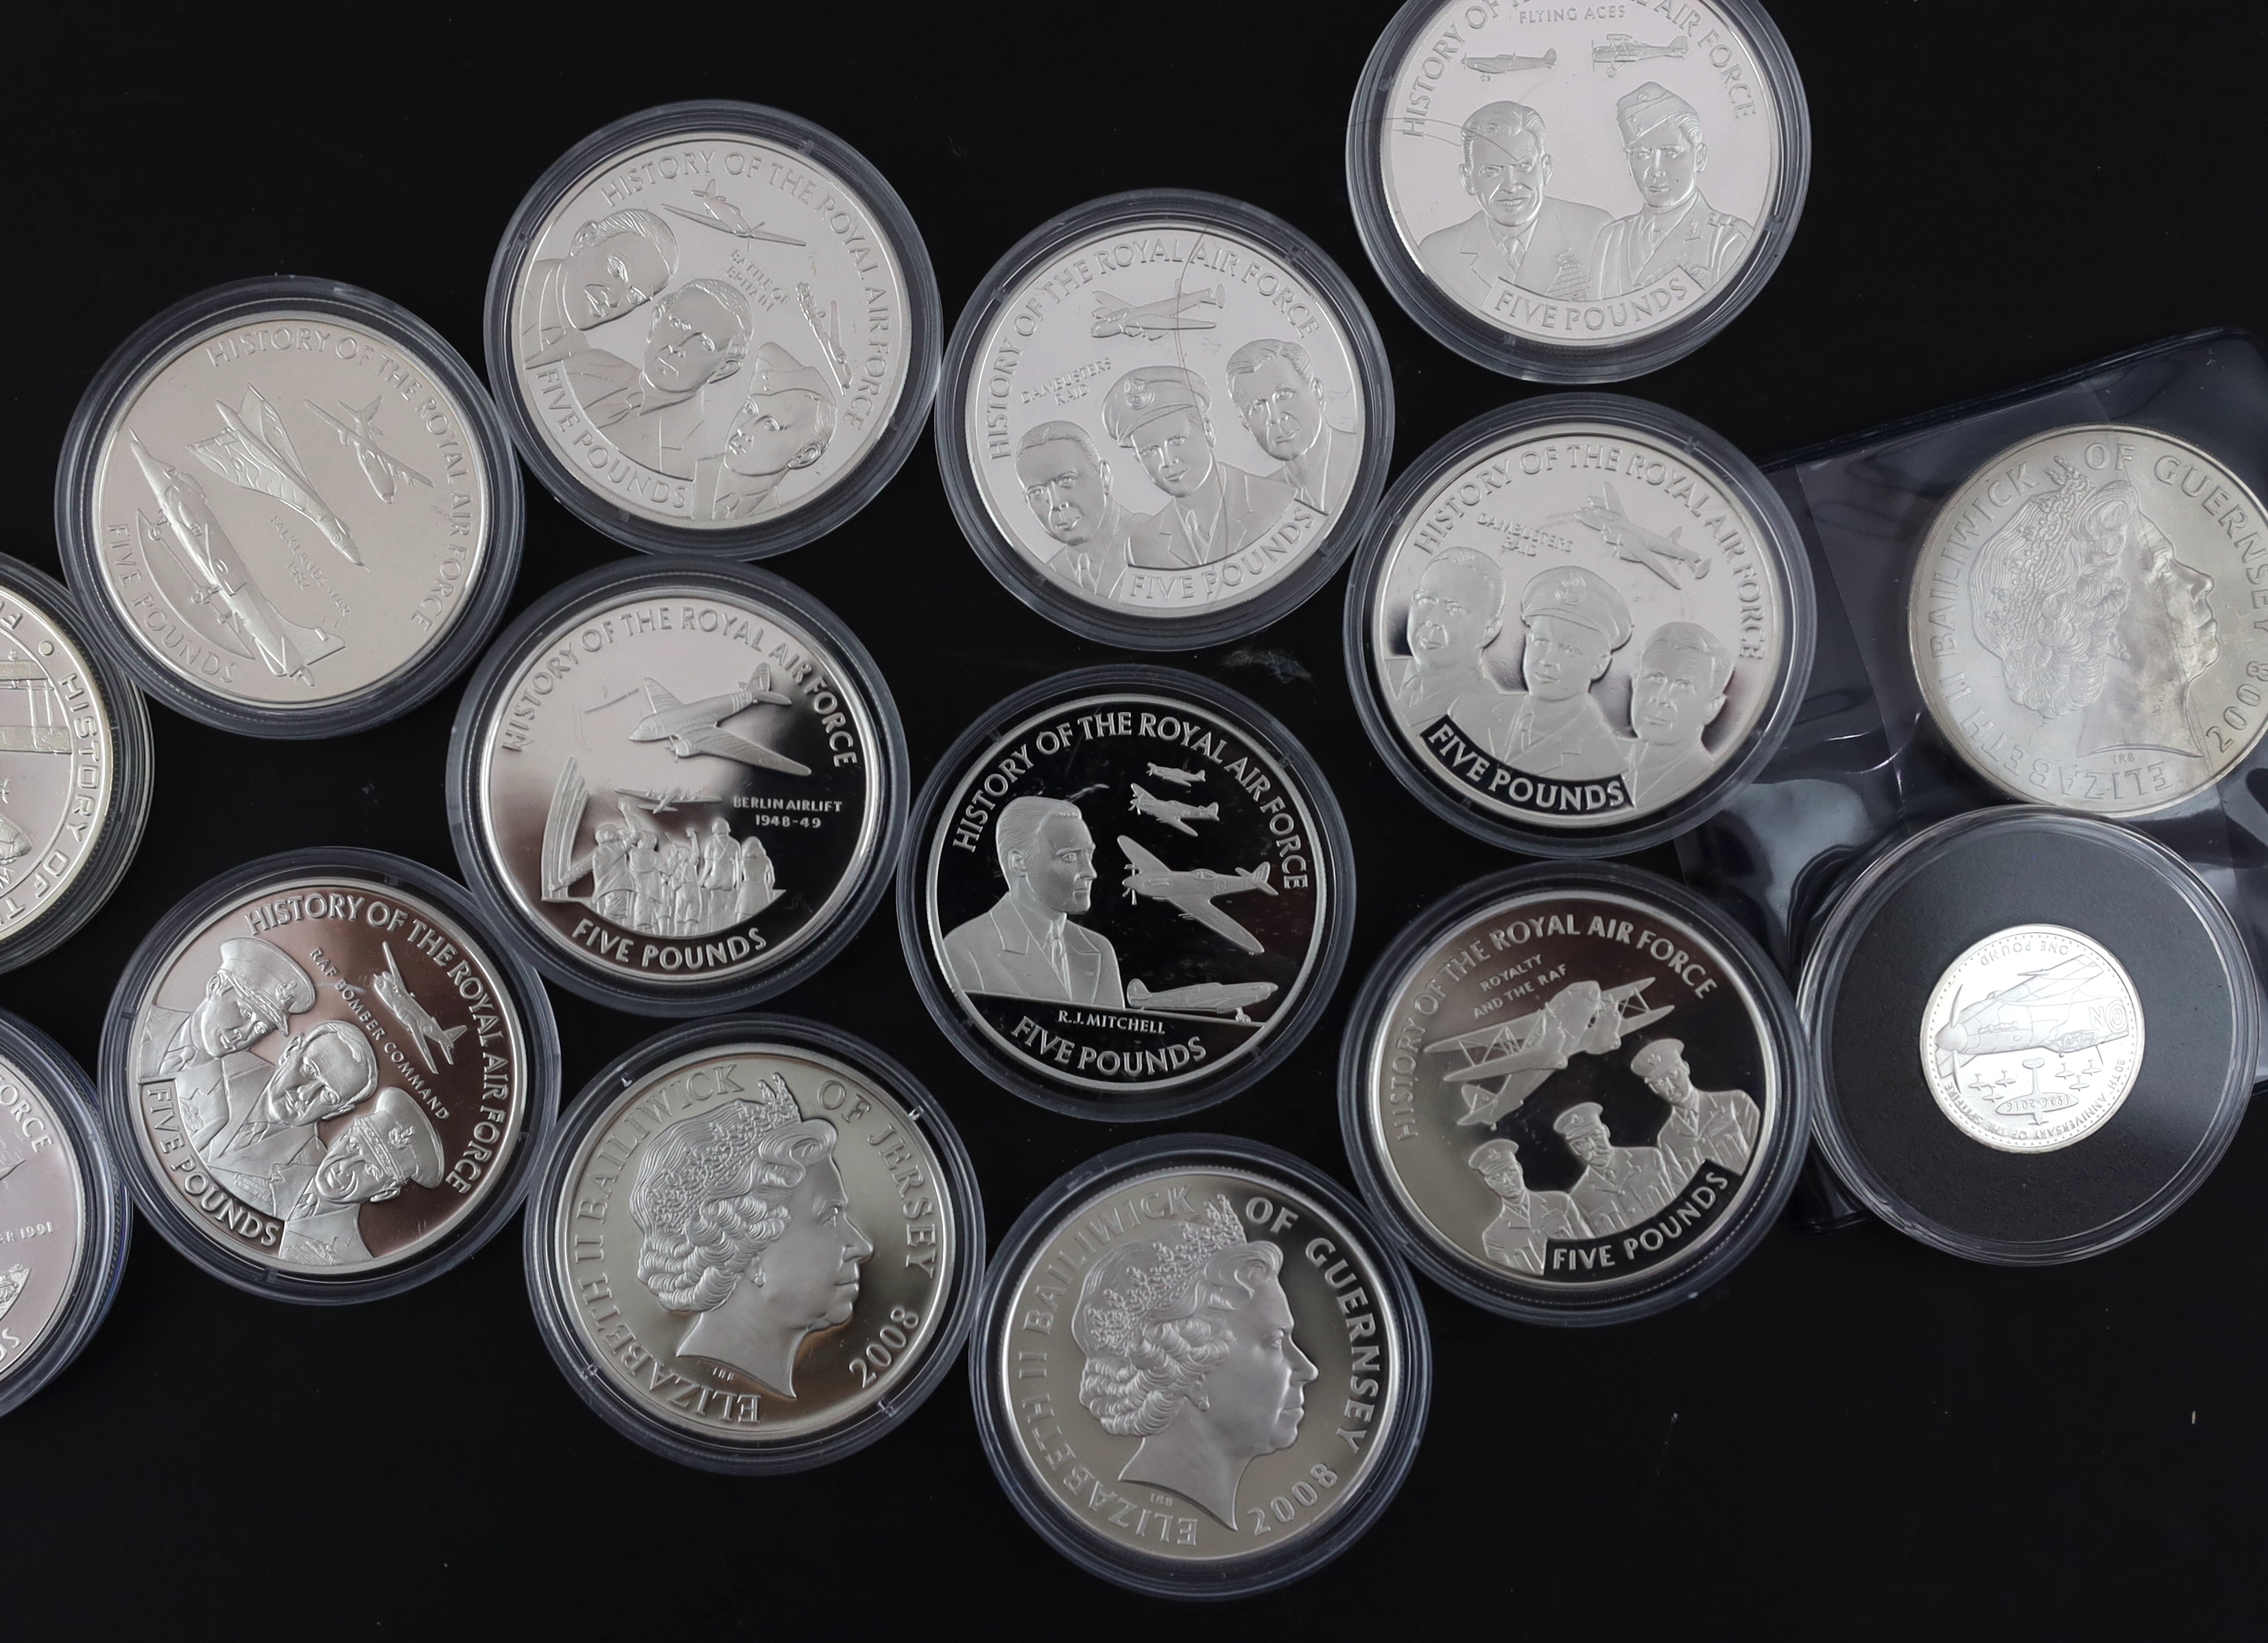 Bailiwick of Jersey and Guernsey coins, Elizabeth II, 13 History of the RAF proof silver £5 coins, 2008, a similar cupronickel coin and a Tristan da Cunha proof silver 80th anniversary Spitfire £1 coin (15)